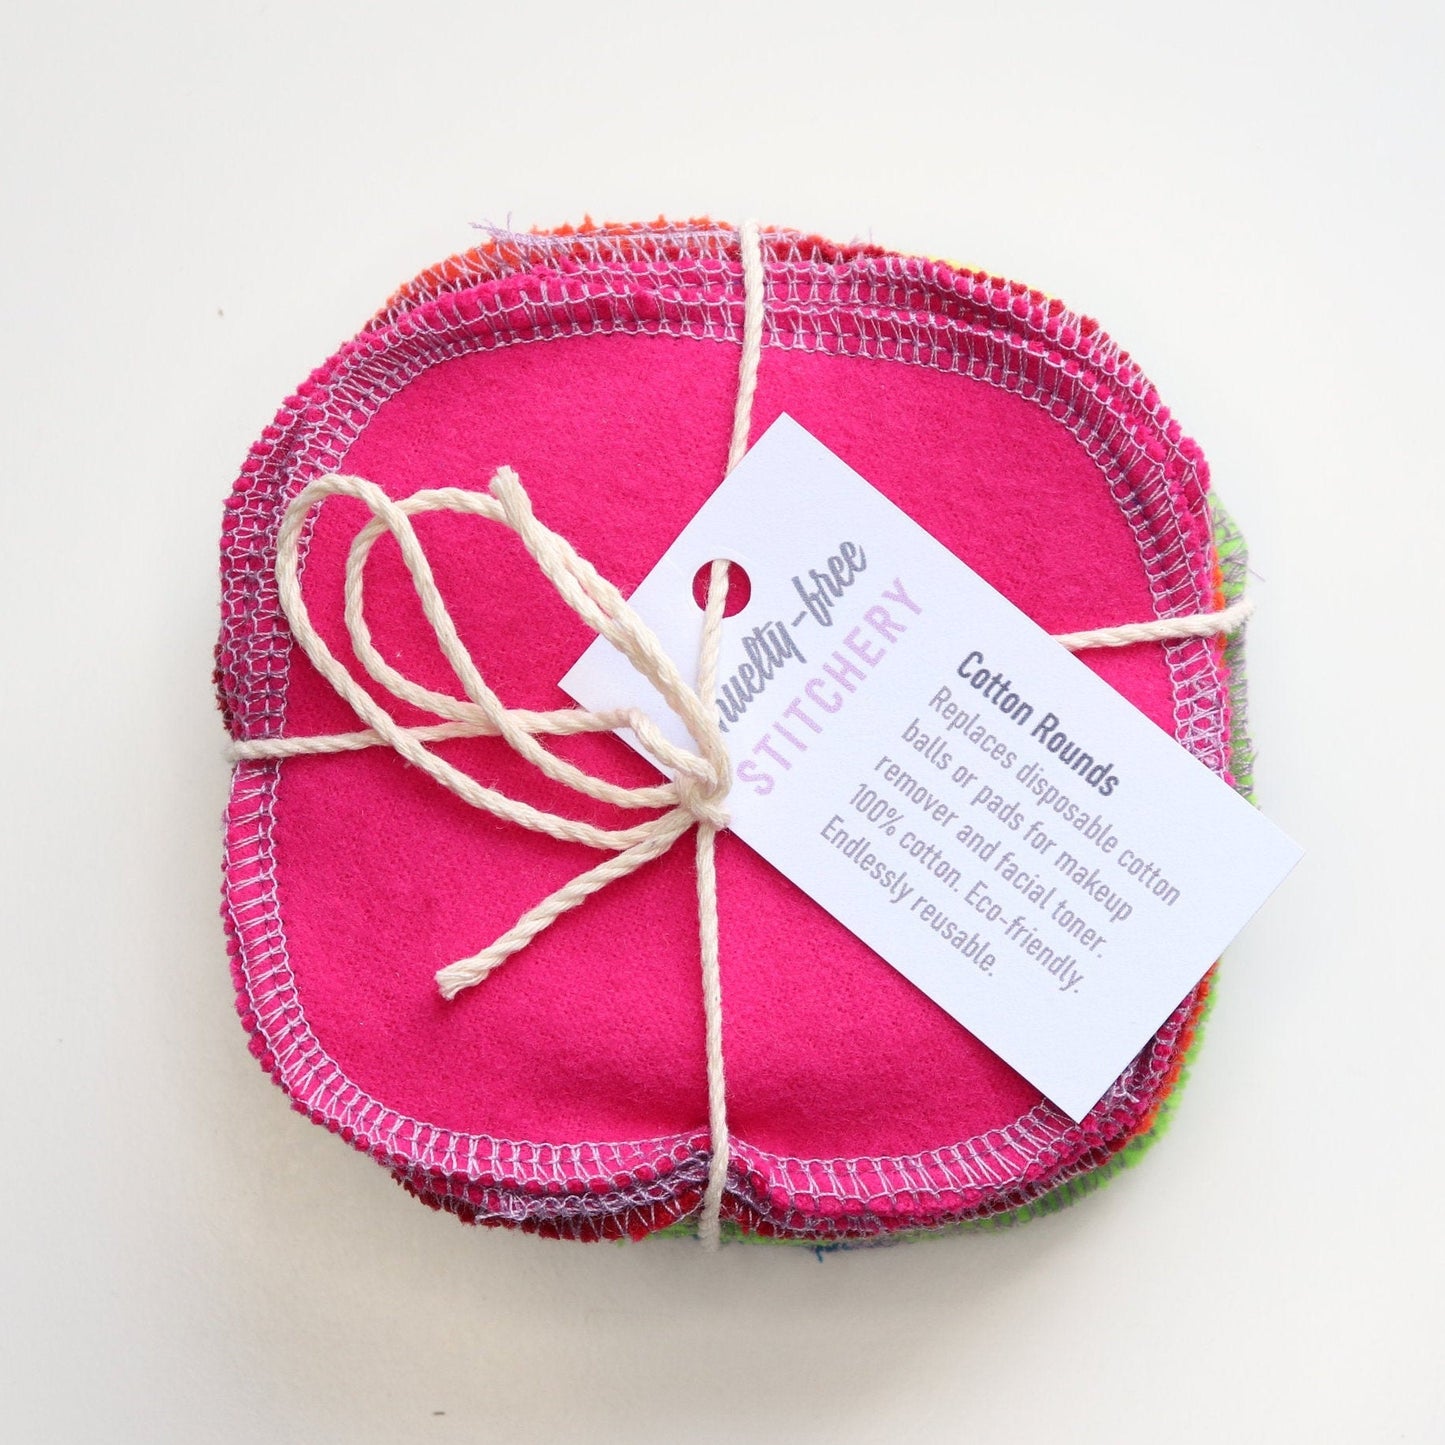 Bundled pack of rainbow reusable cotton rounds tied with string and a small white paper tag.